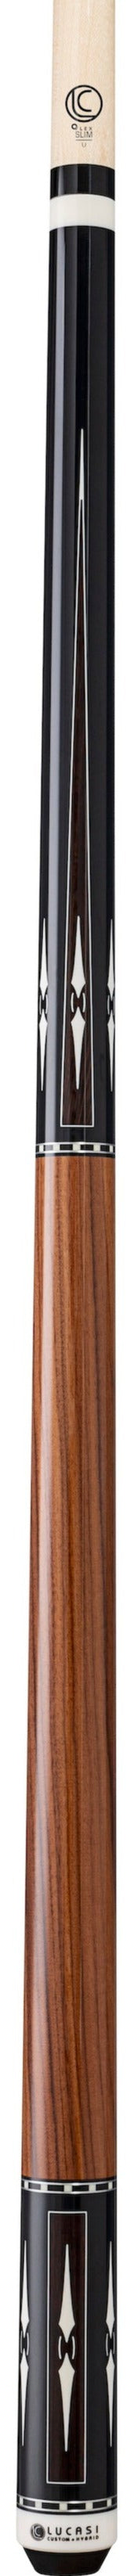 Lucasi LUX70 Limited Edition Pool Cue -Lucasi